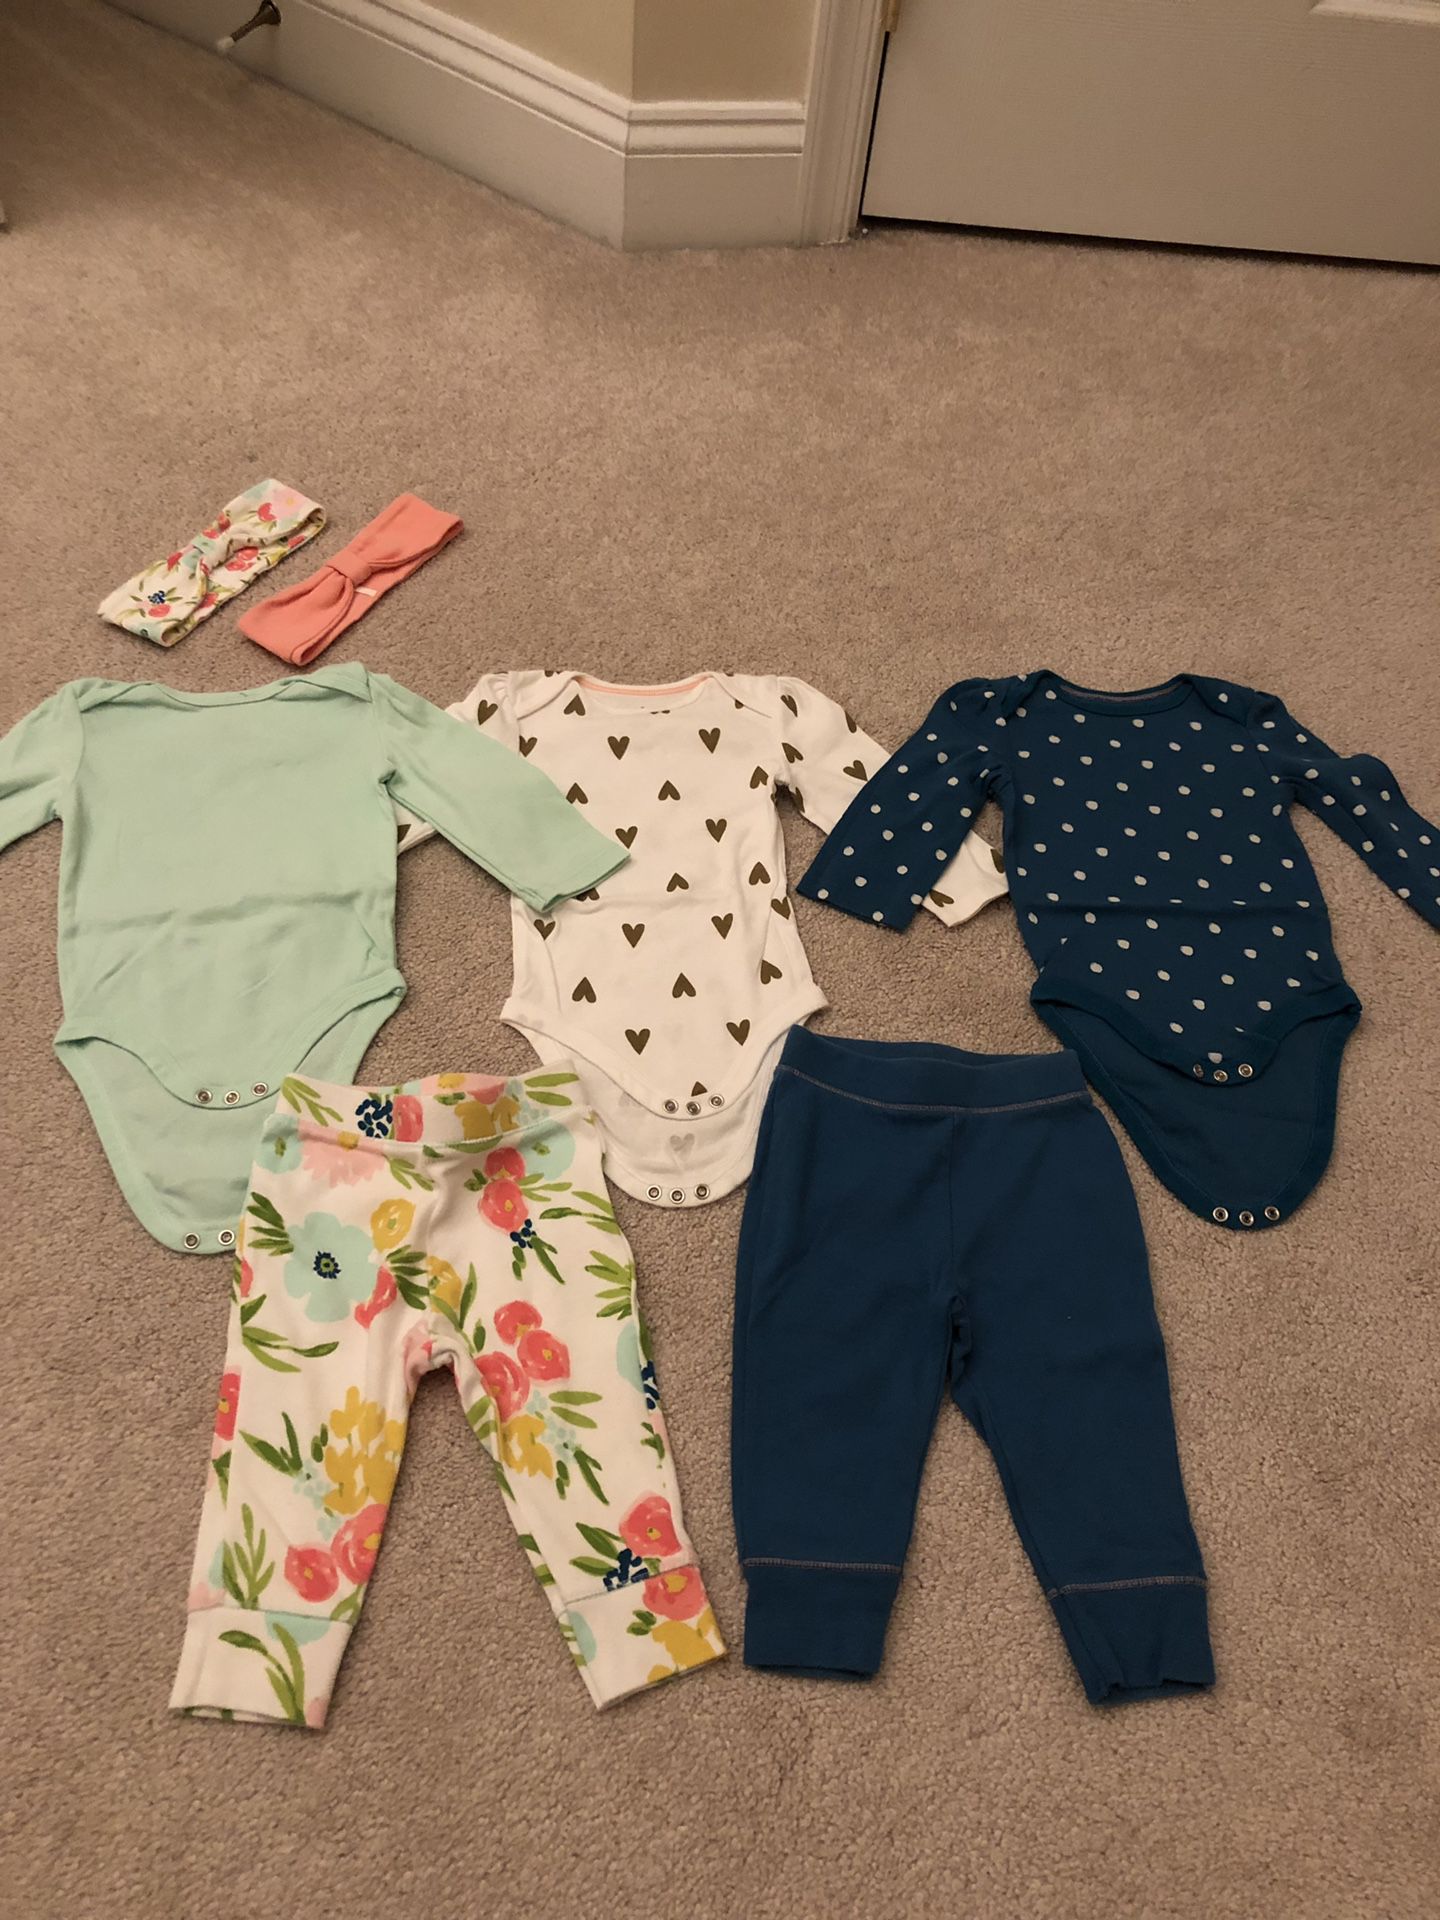 Baby girl clothes 9 months